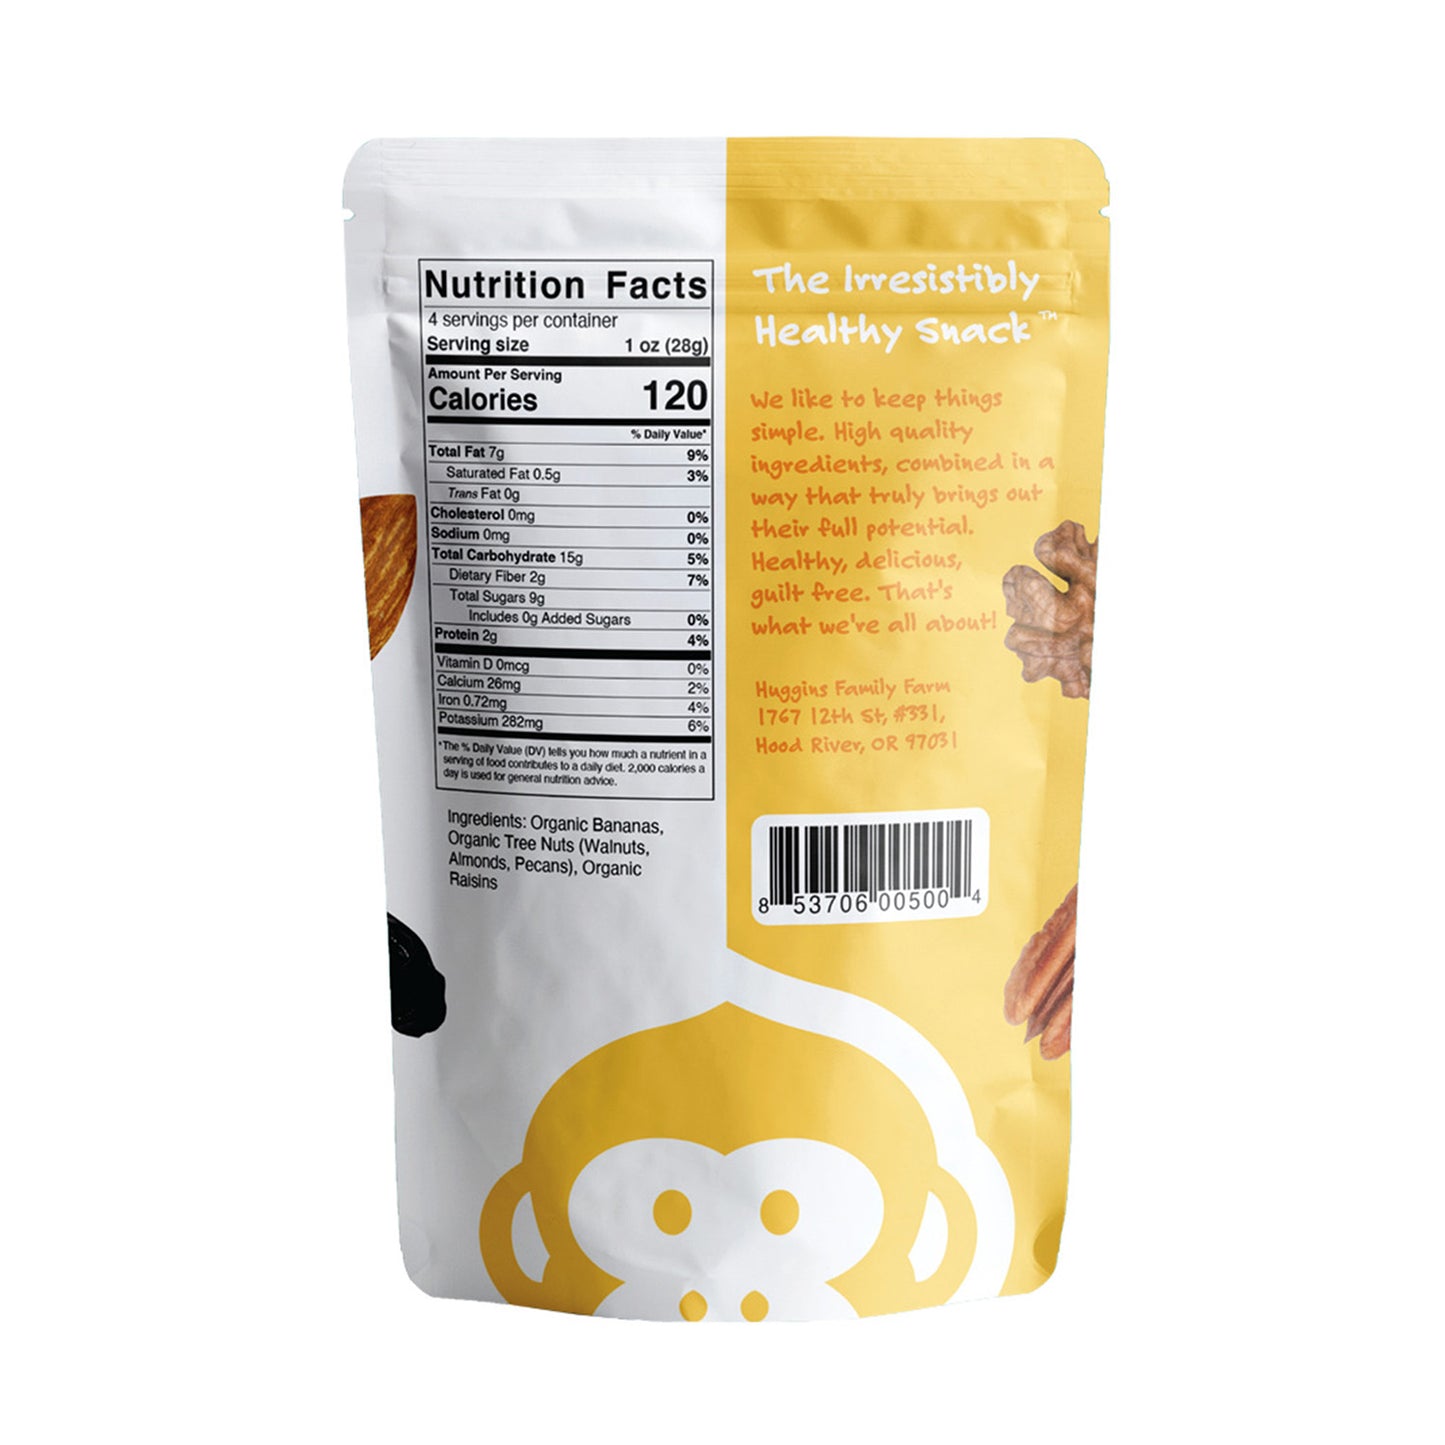 One large yellow and white bag of monkey brittle. The bag is resealable and has the irresistibly healthy snack written on it, as well as the ingredients and nutritional value.